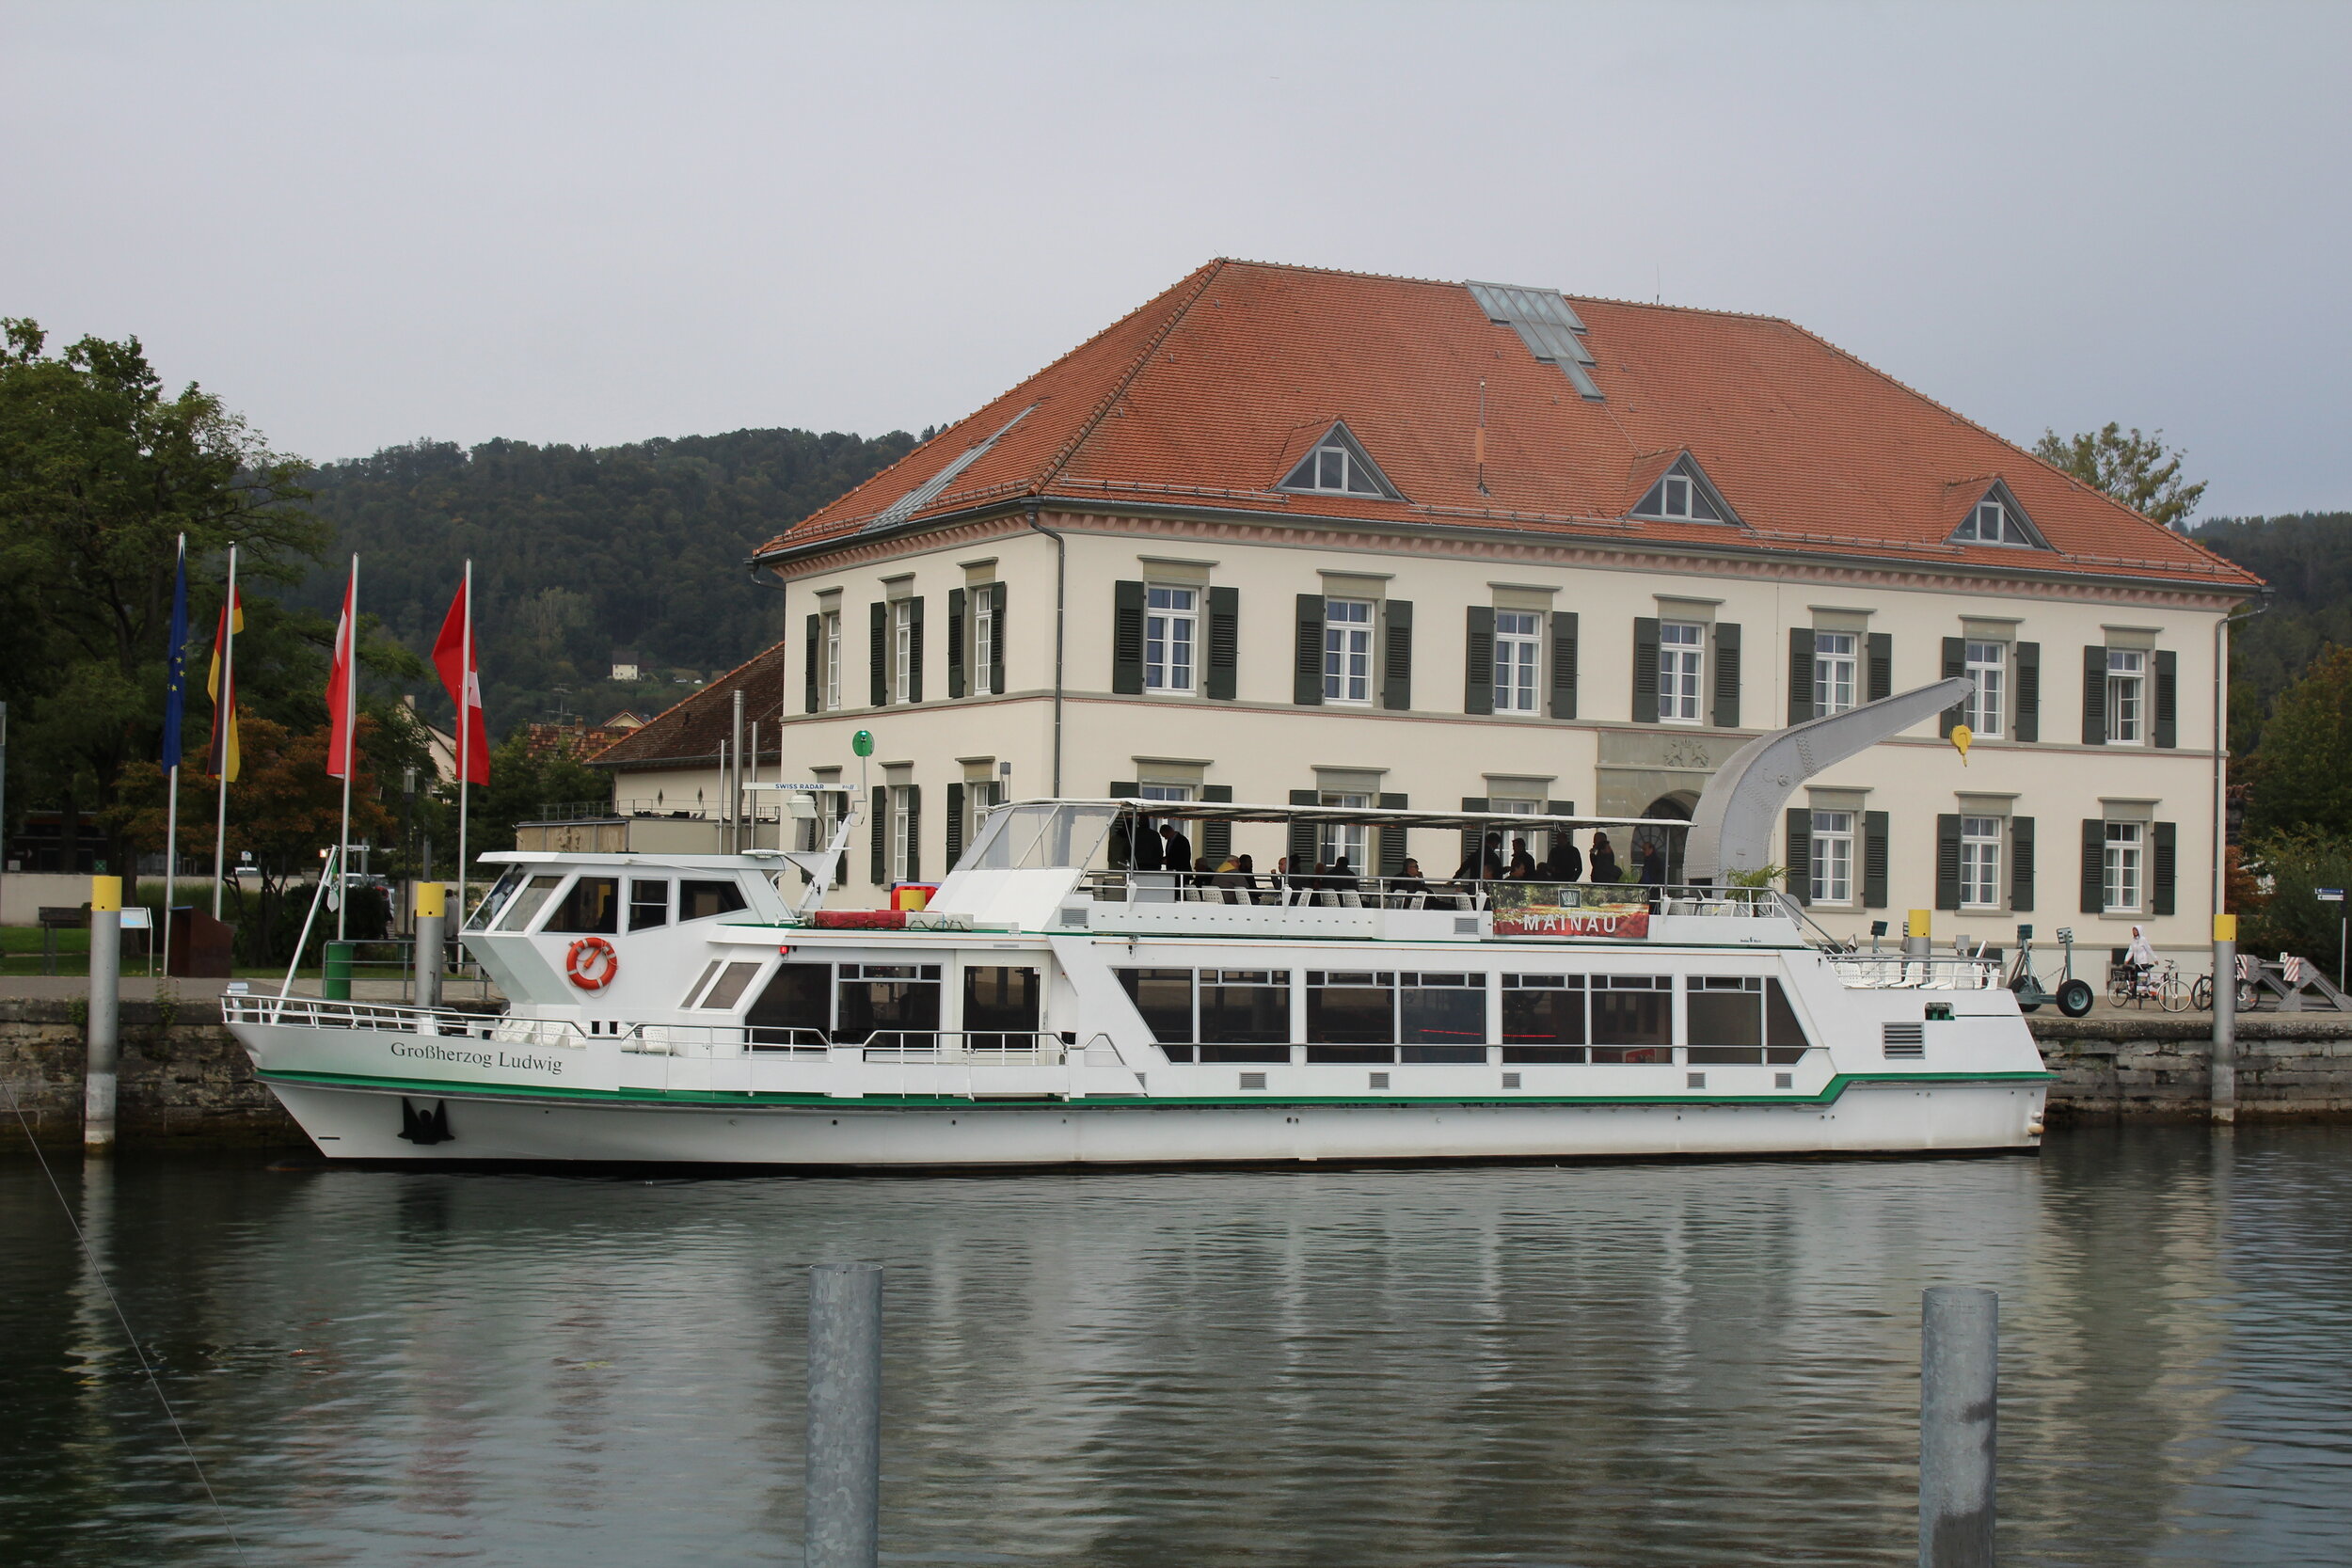  Participants unwind for the evening on boat trip to Mainau 